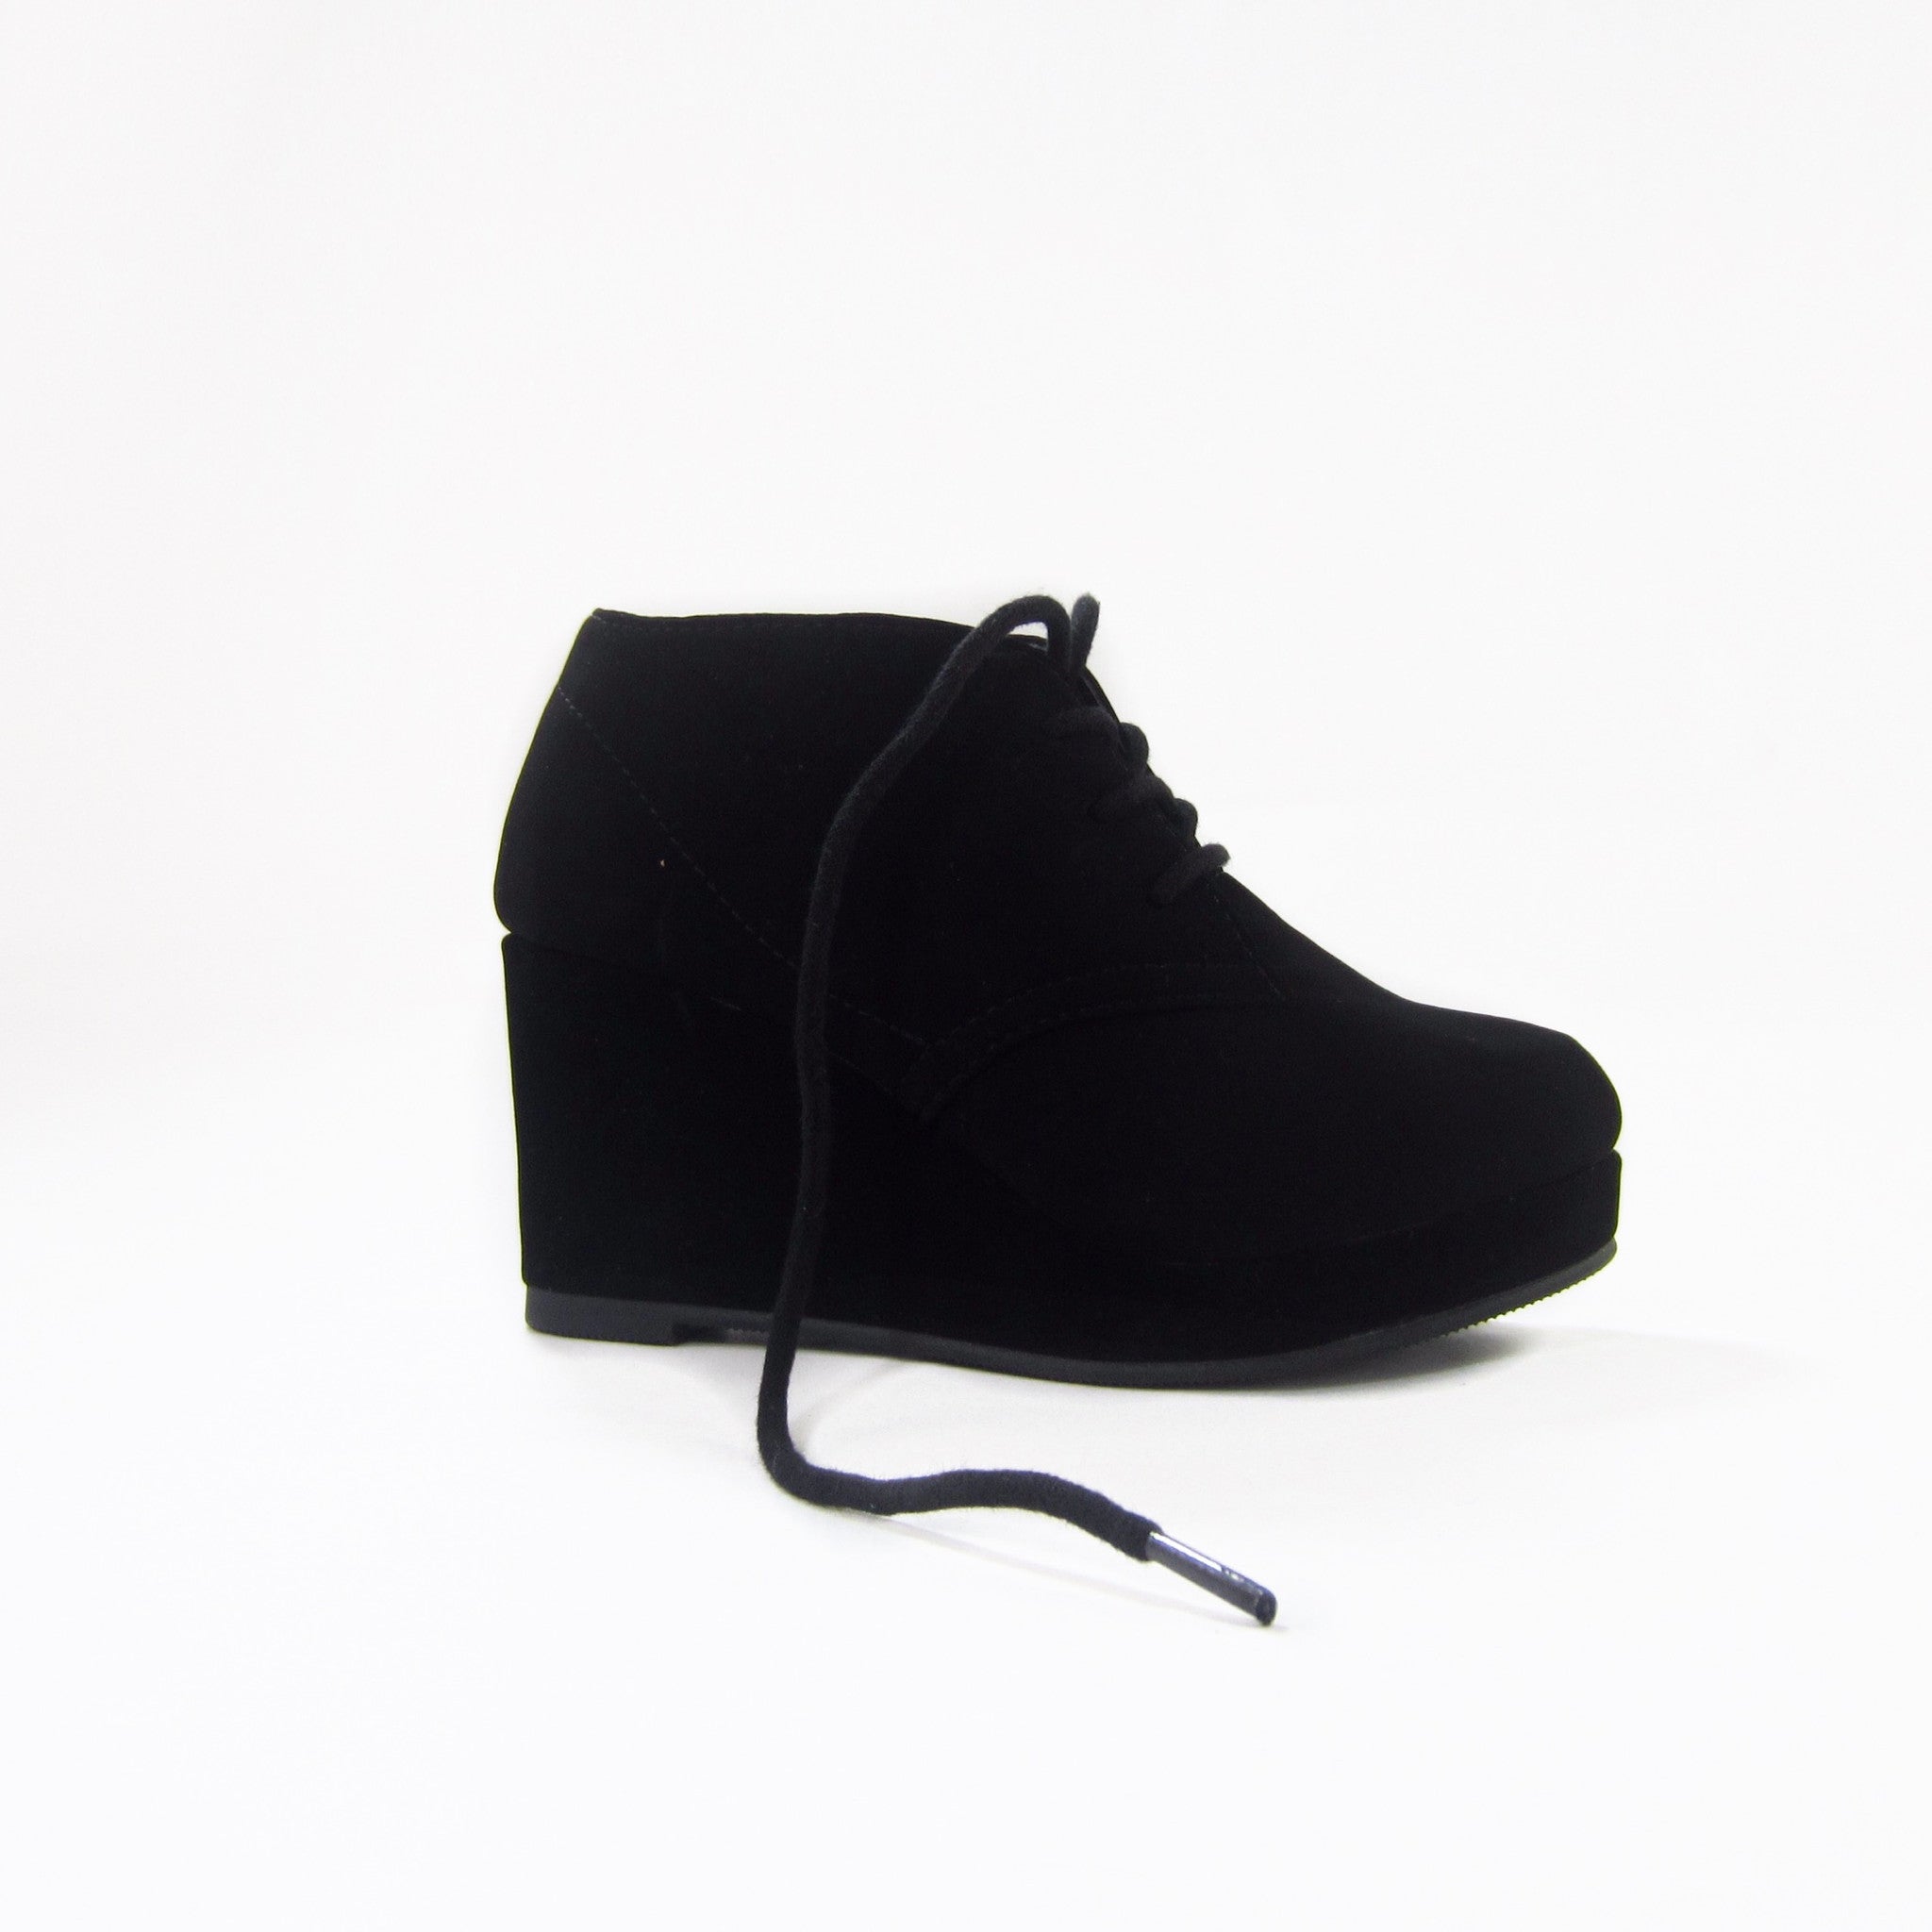 Girls Black Wedge Boots | Girls Shoes 